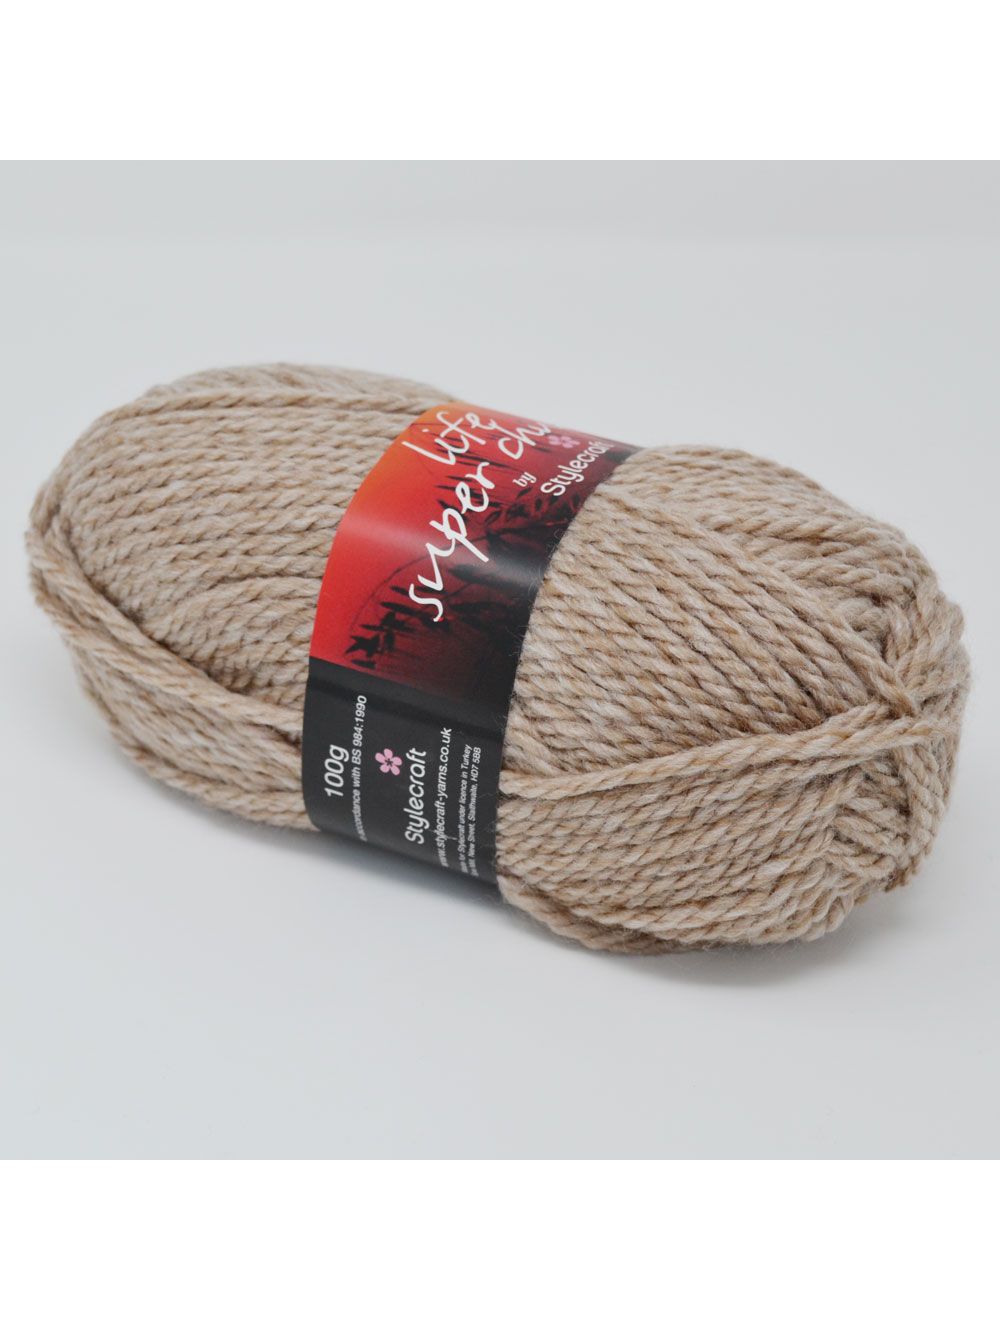 Parchment Life Super Chunky Wool | Chunky Wool | Knitting Wool | Calico ...